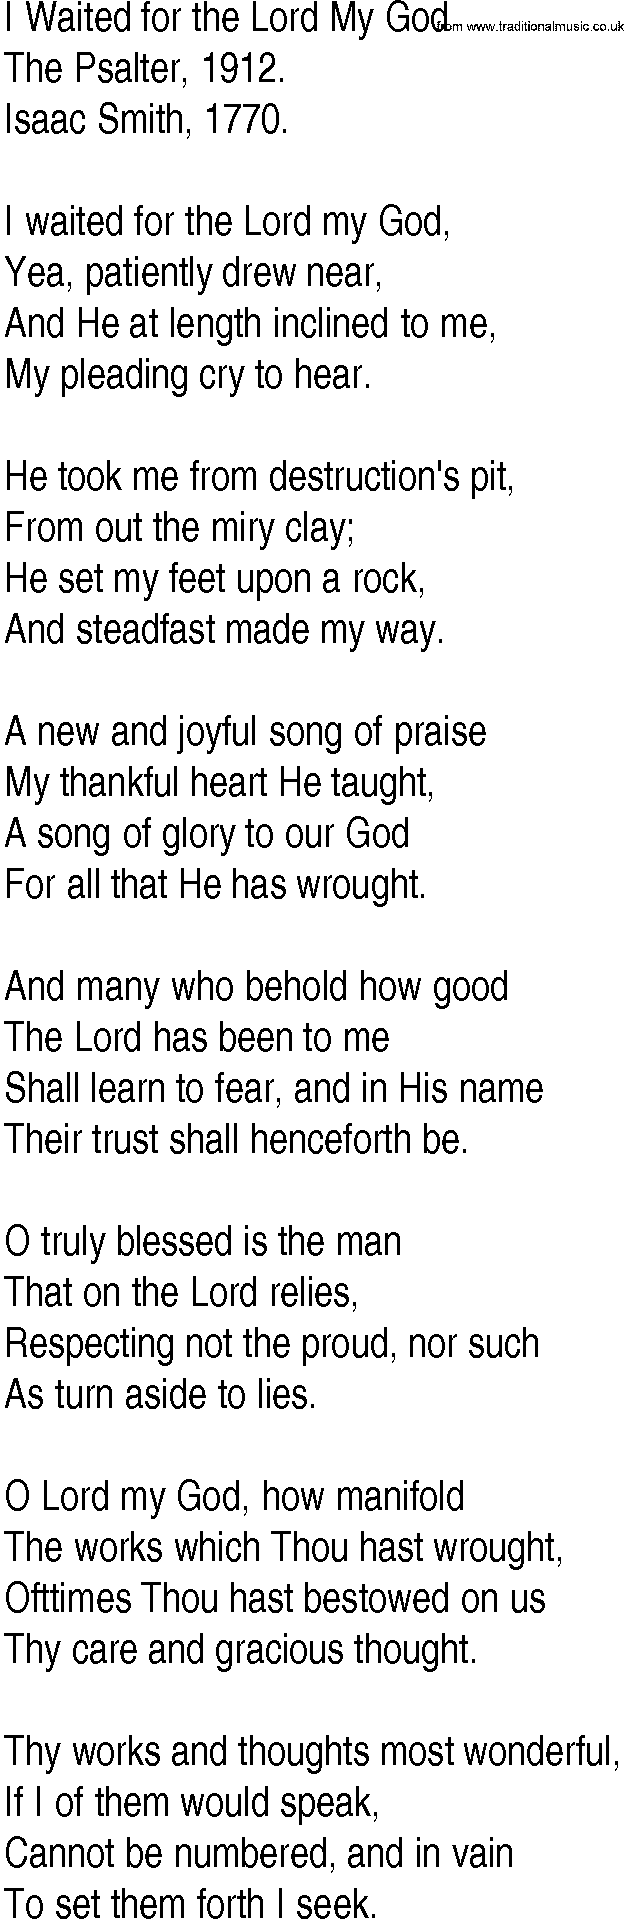 Hymn and Gospel Song: I Waited for the Lord My God by The Psalter lyrics